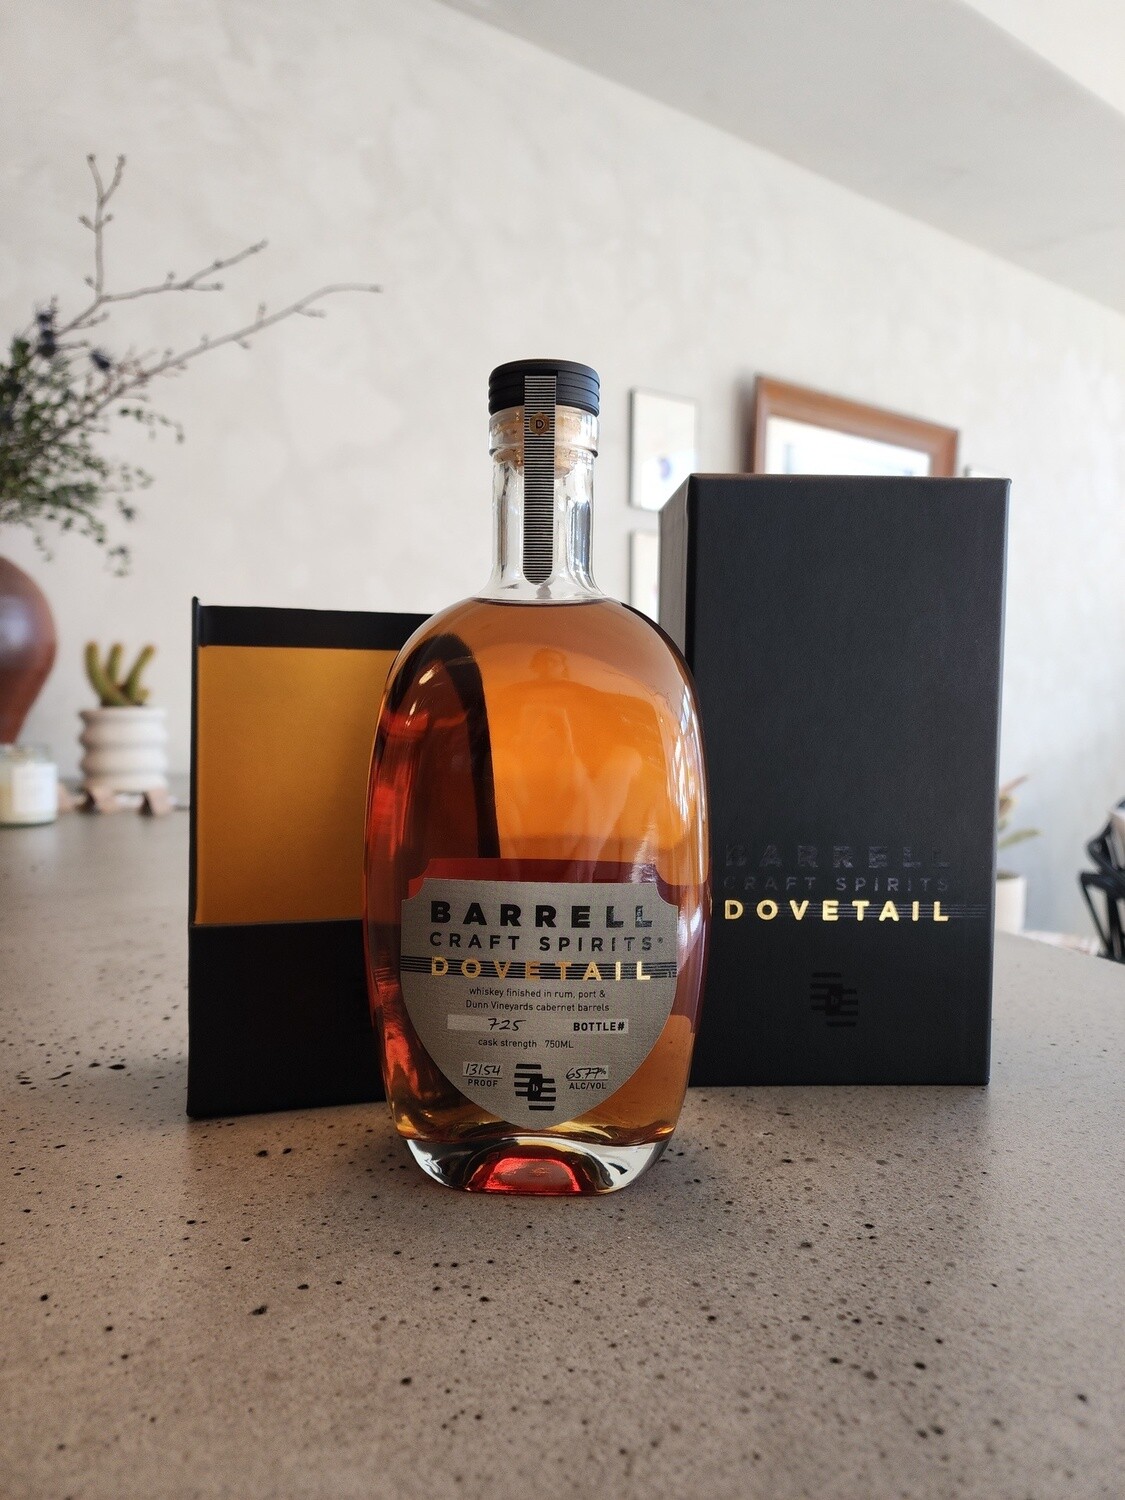 Barrell Craft Spirits Dovetail Limited Edition Grey Label